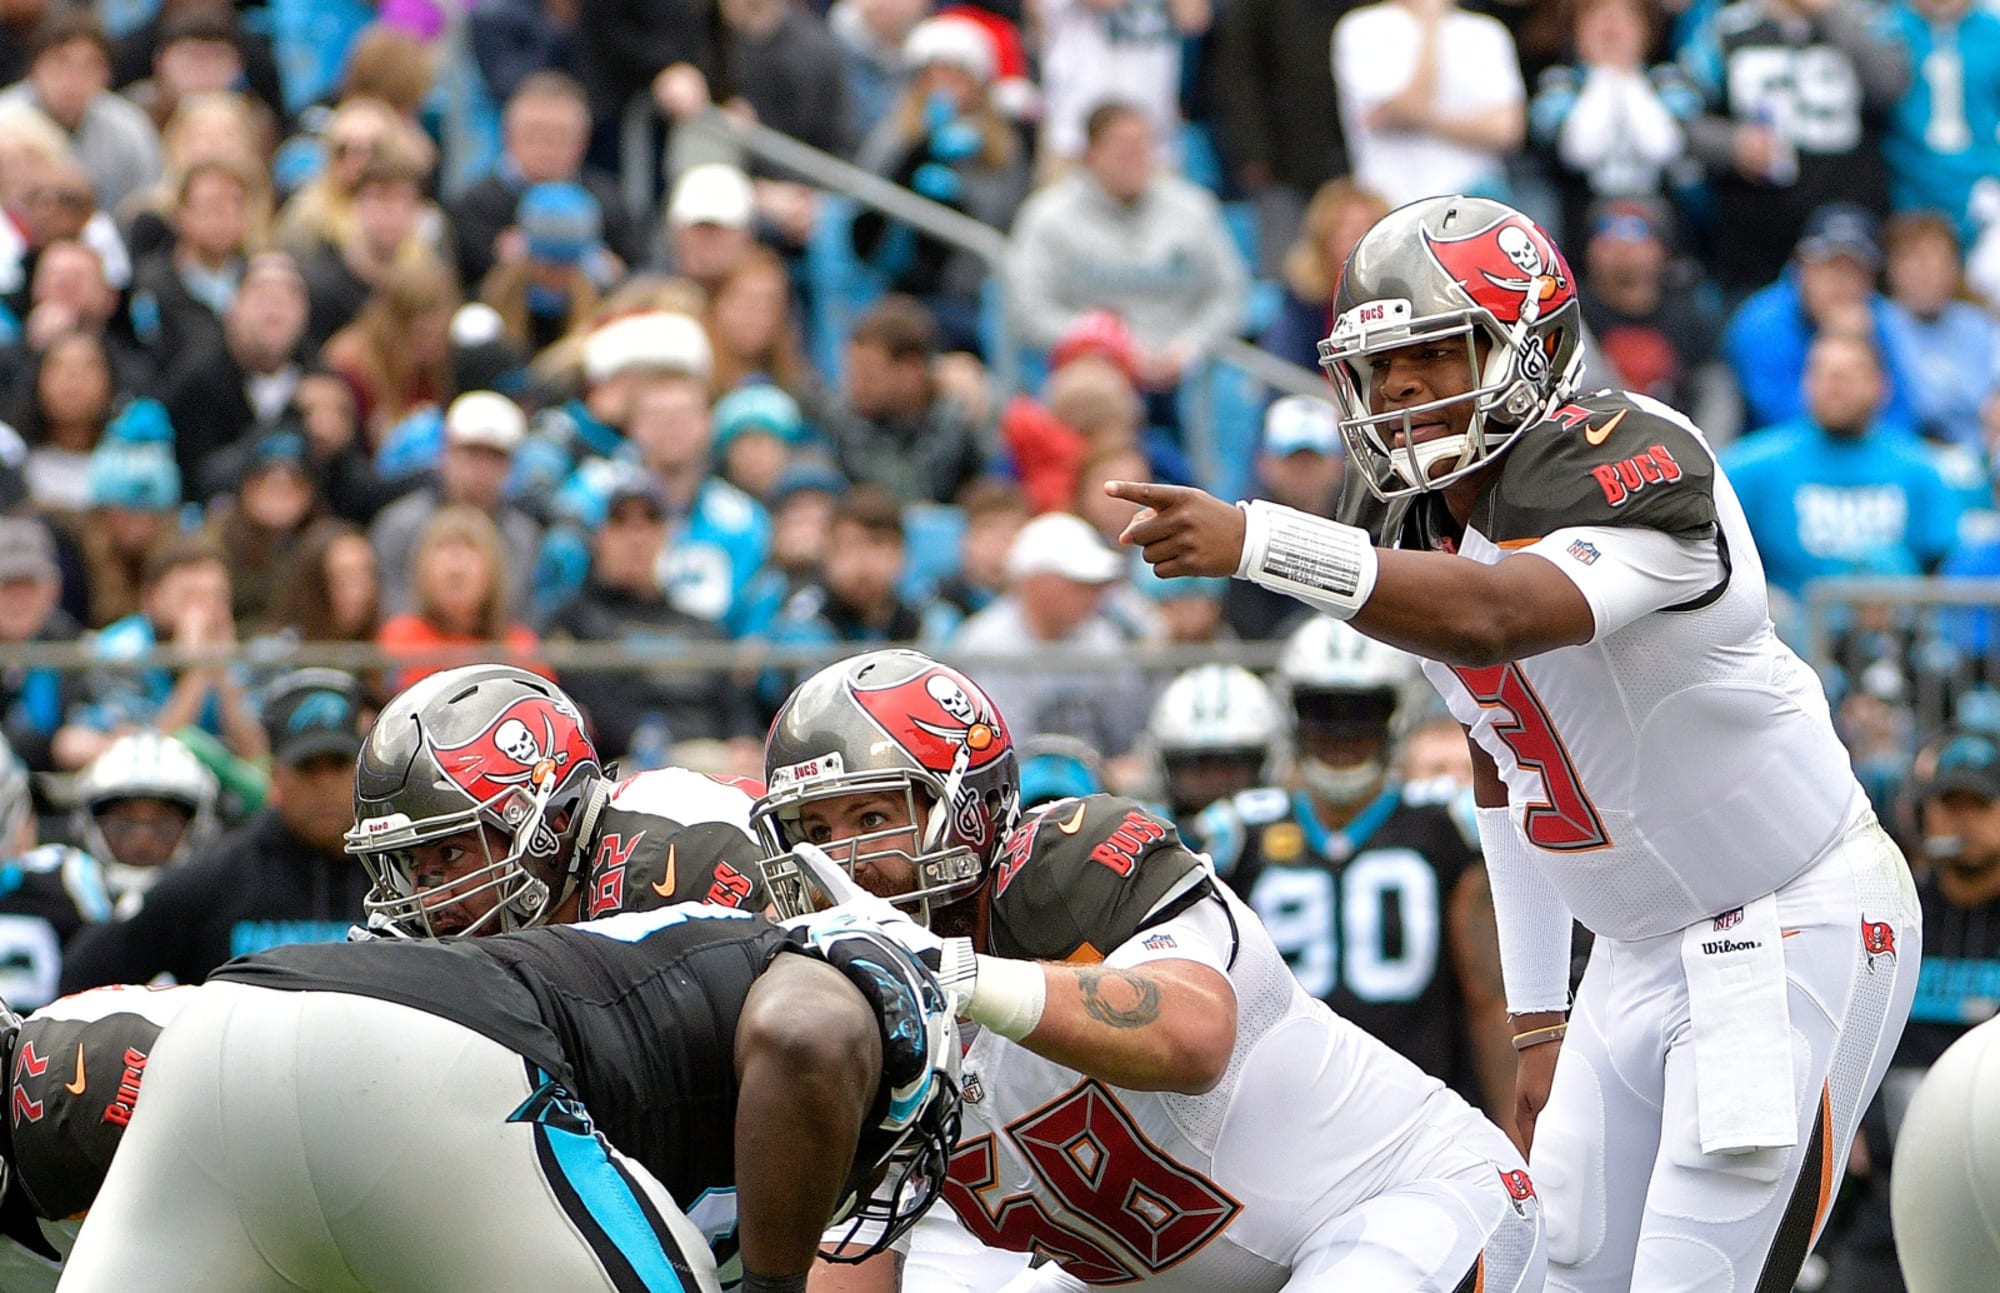 Offensive line of Tampa Bay Buccaneers ranked bottom third of league